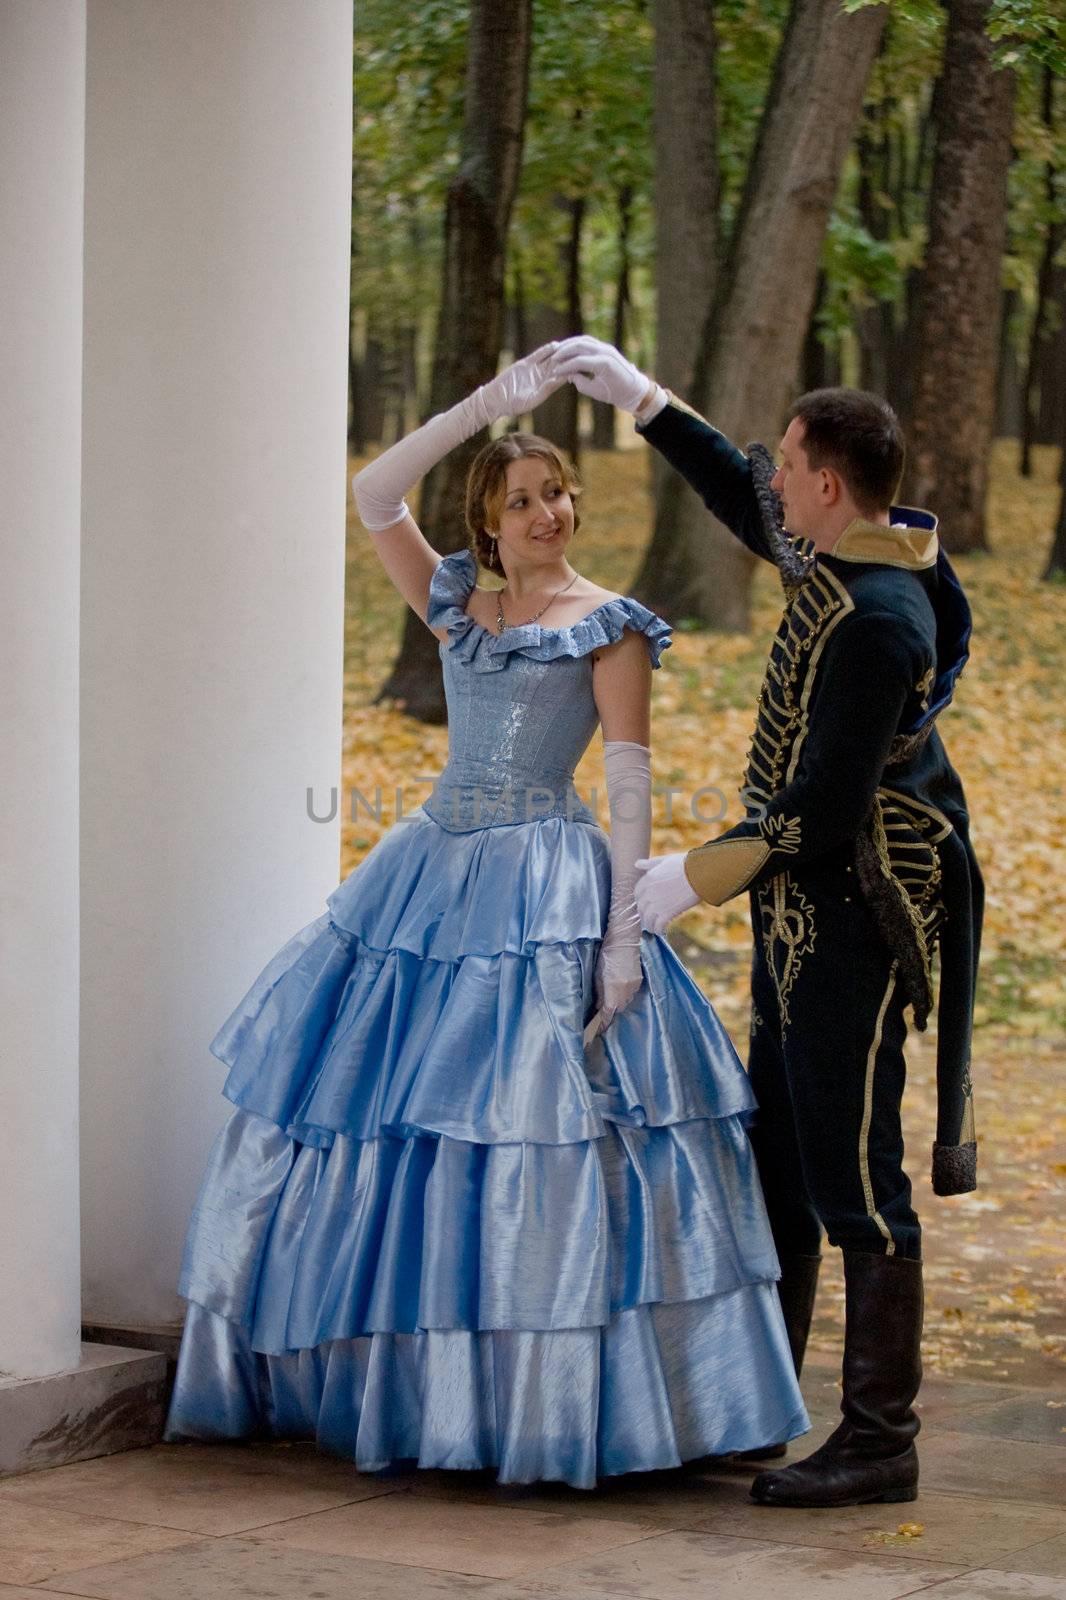 Lady and hussar in  XIX century dress in the park 
